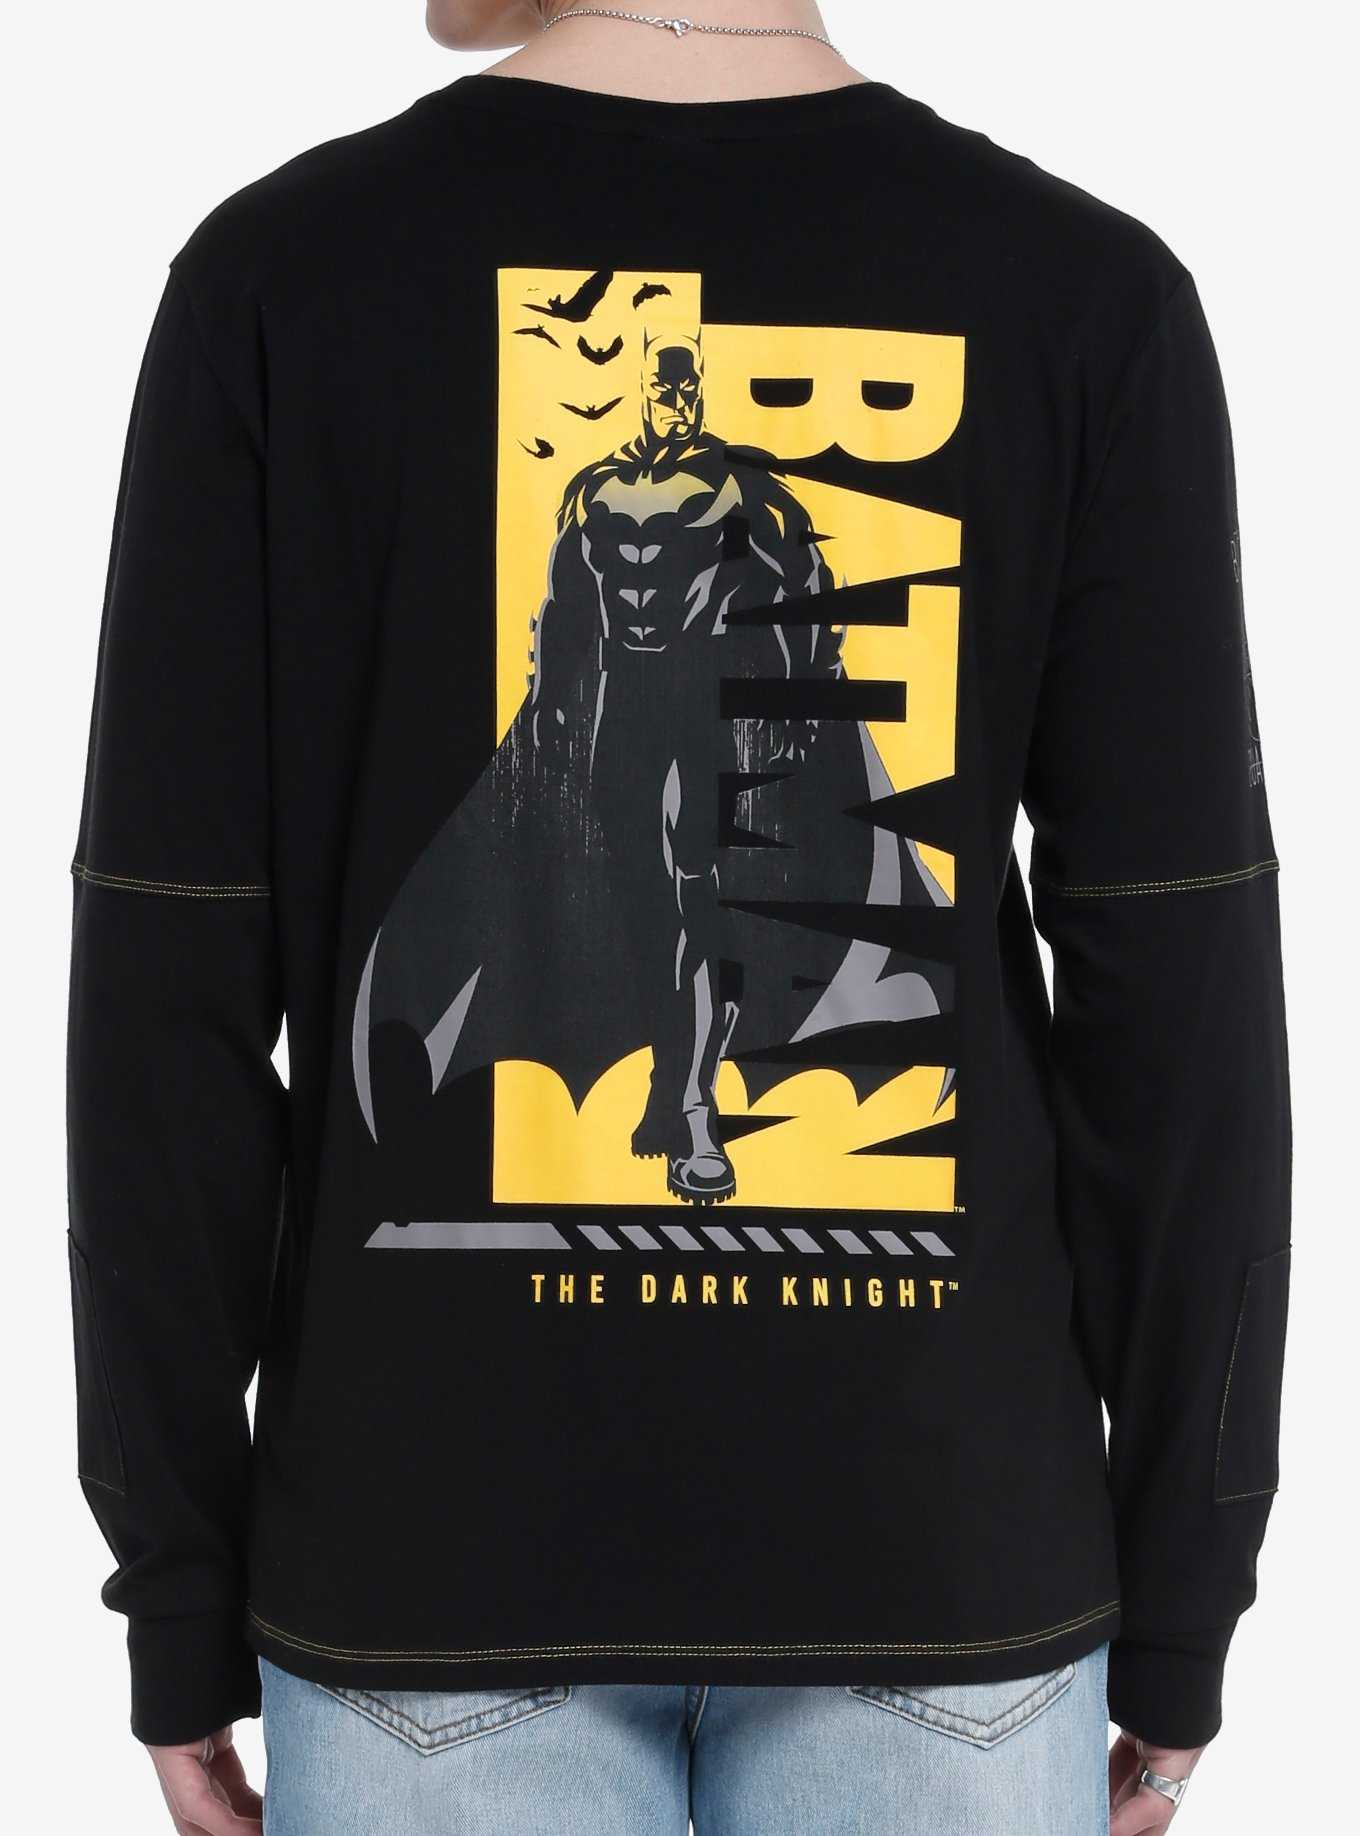 OFFICIAL The Flash Merchandise, T-Shirts & Funko Pop | Hot Topic